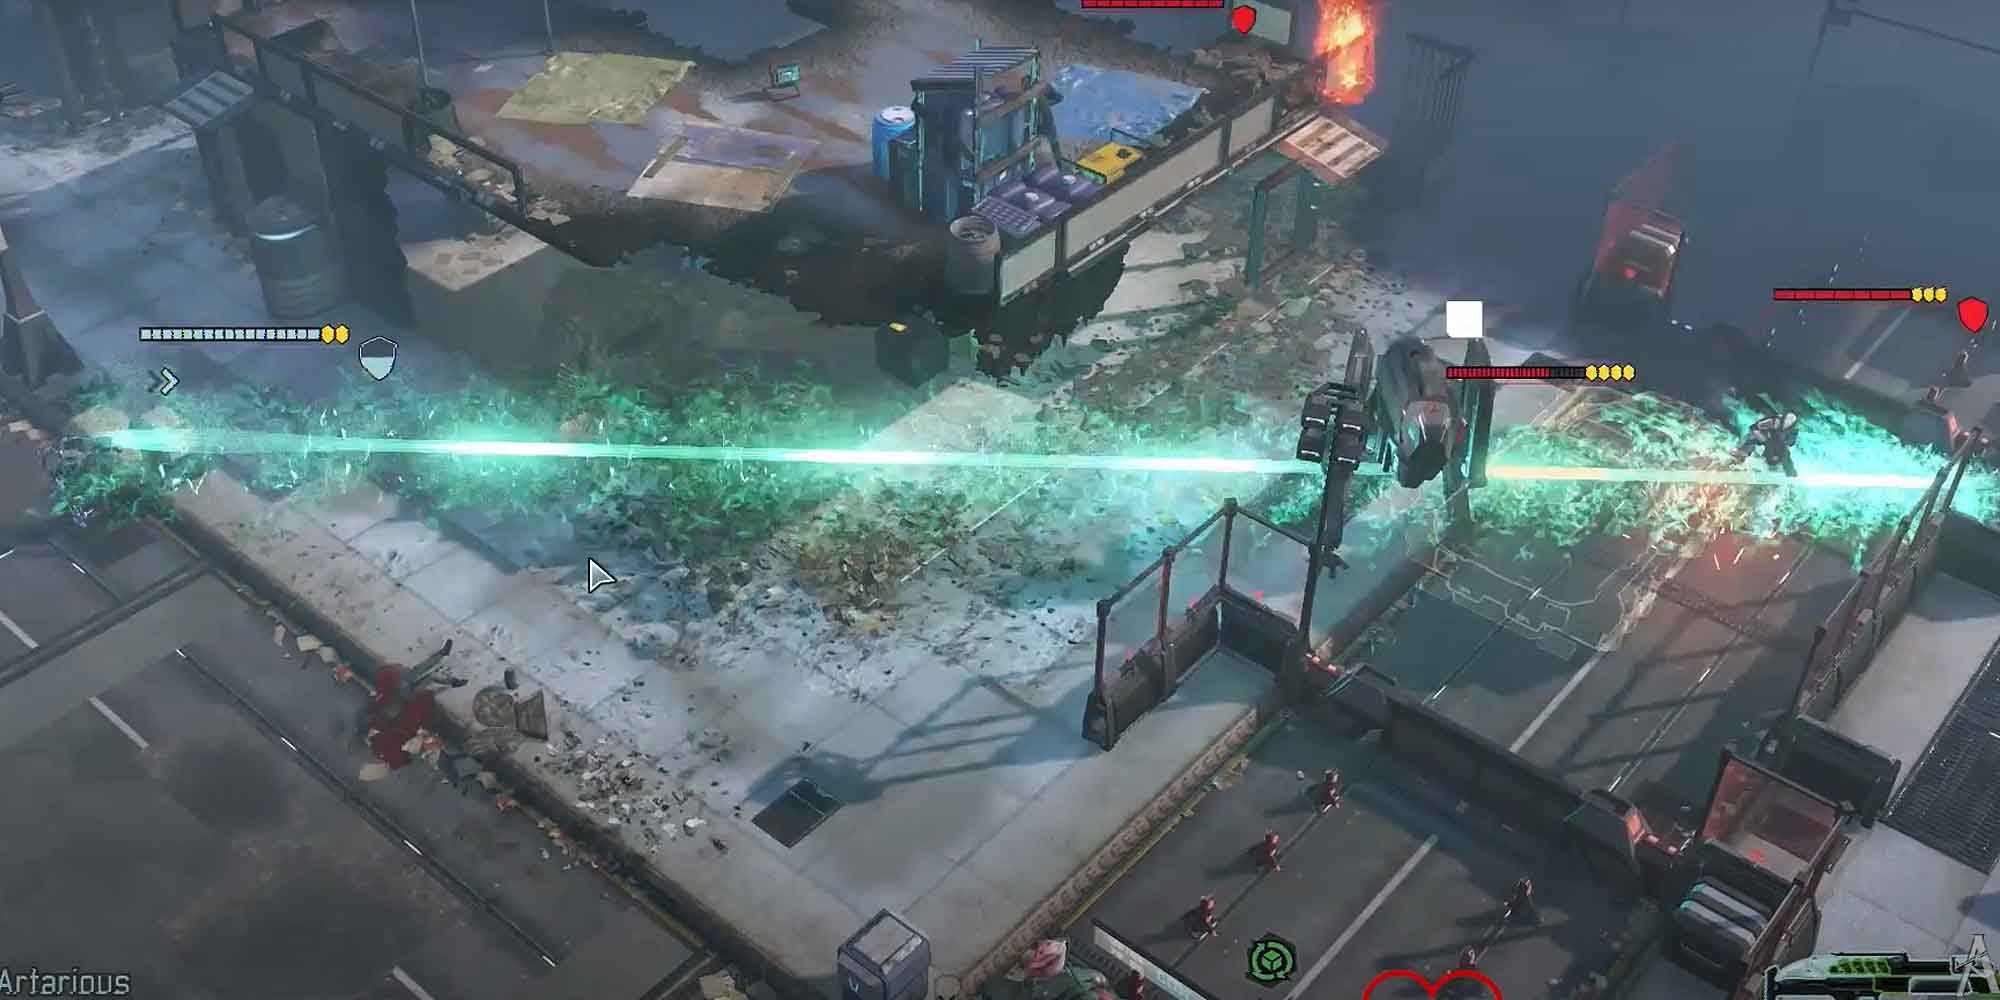 Hitting a Sectopod with a Plasma Blaster in Xcom 2